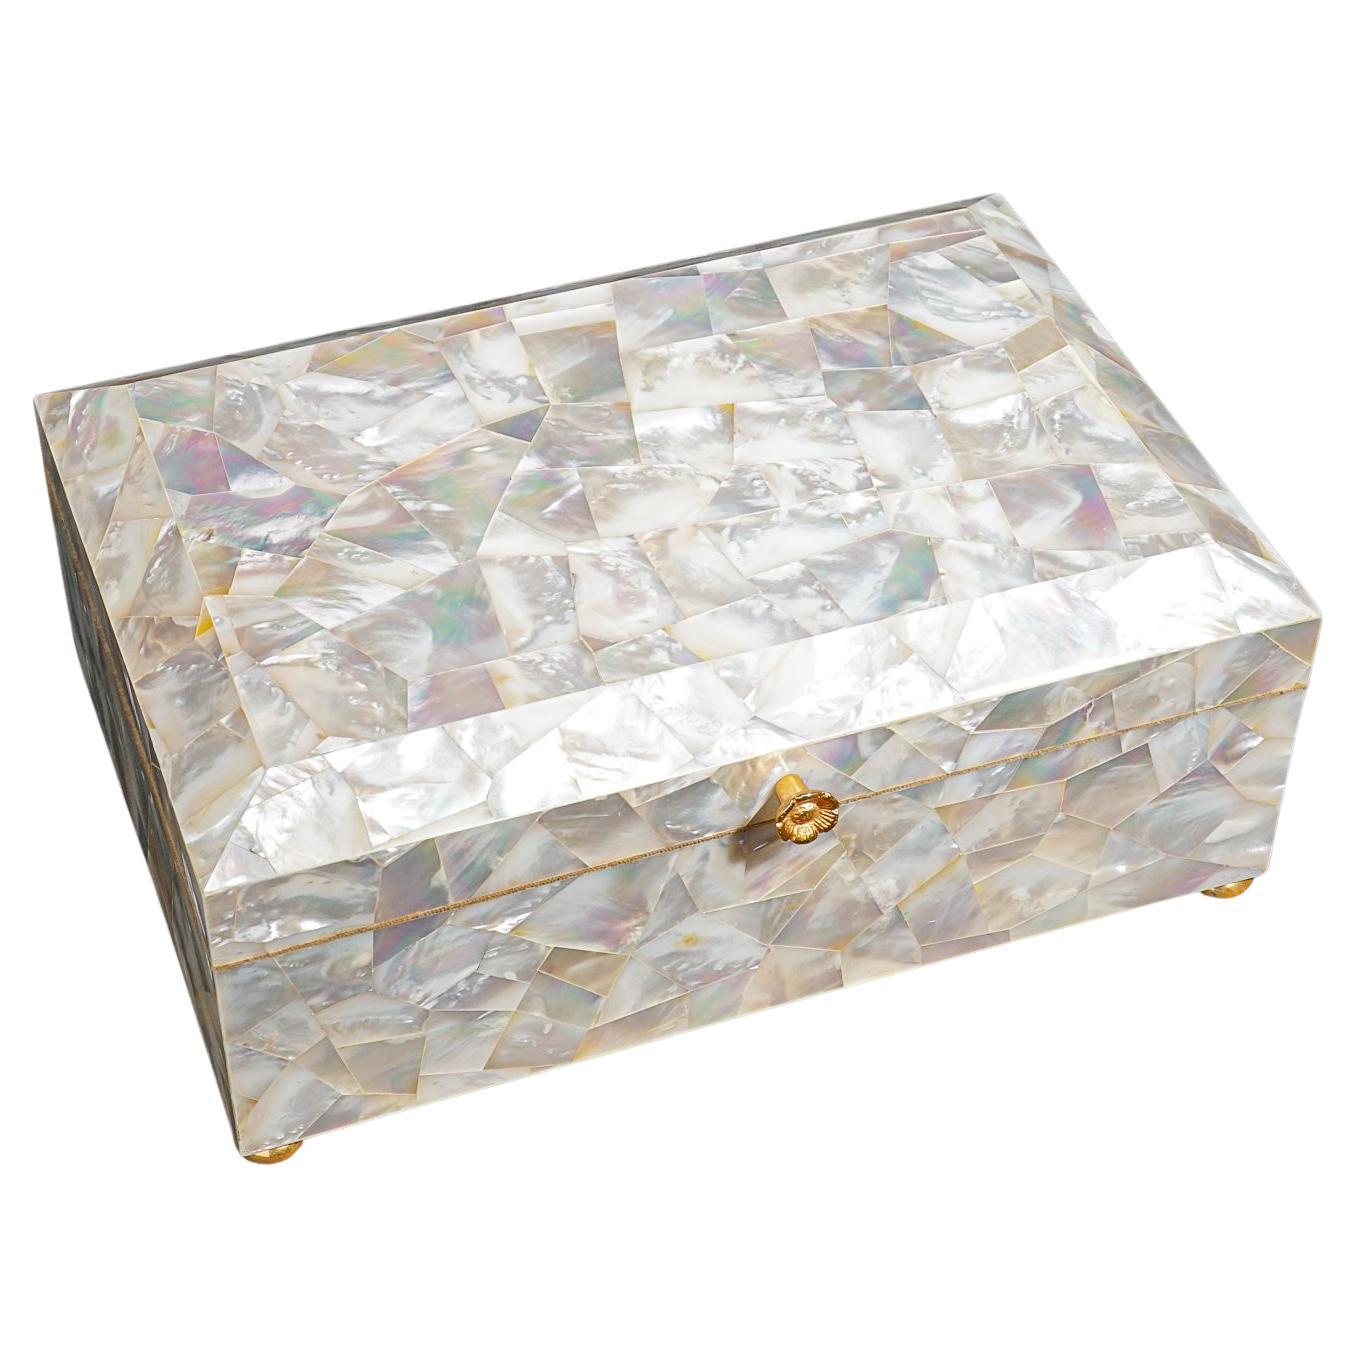 Genuine Large Mother of Pearl Decorative Jewelry Box (12" x 8.25" x 5", 9.5 lbs)